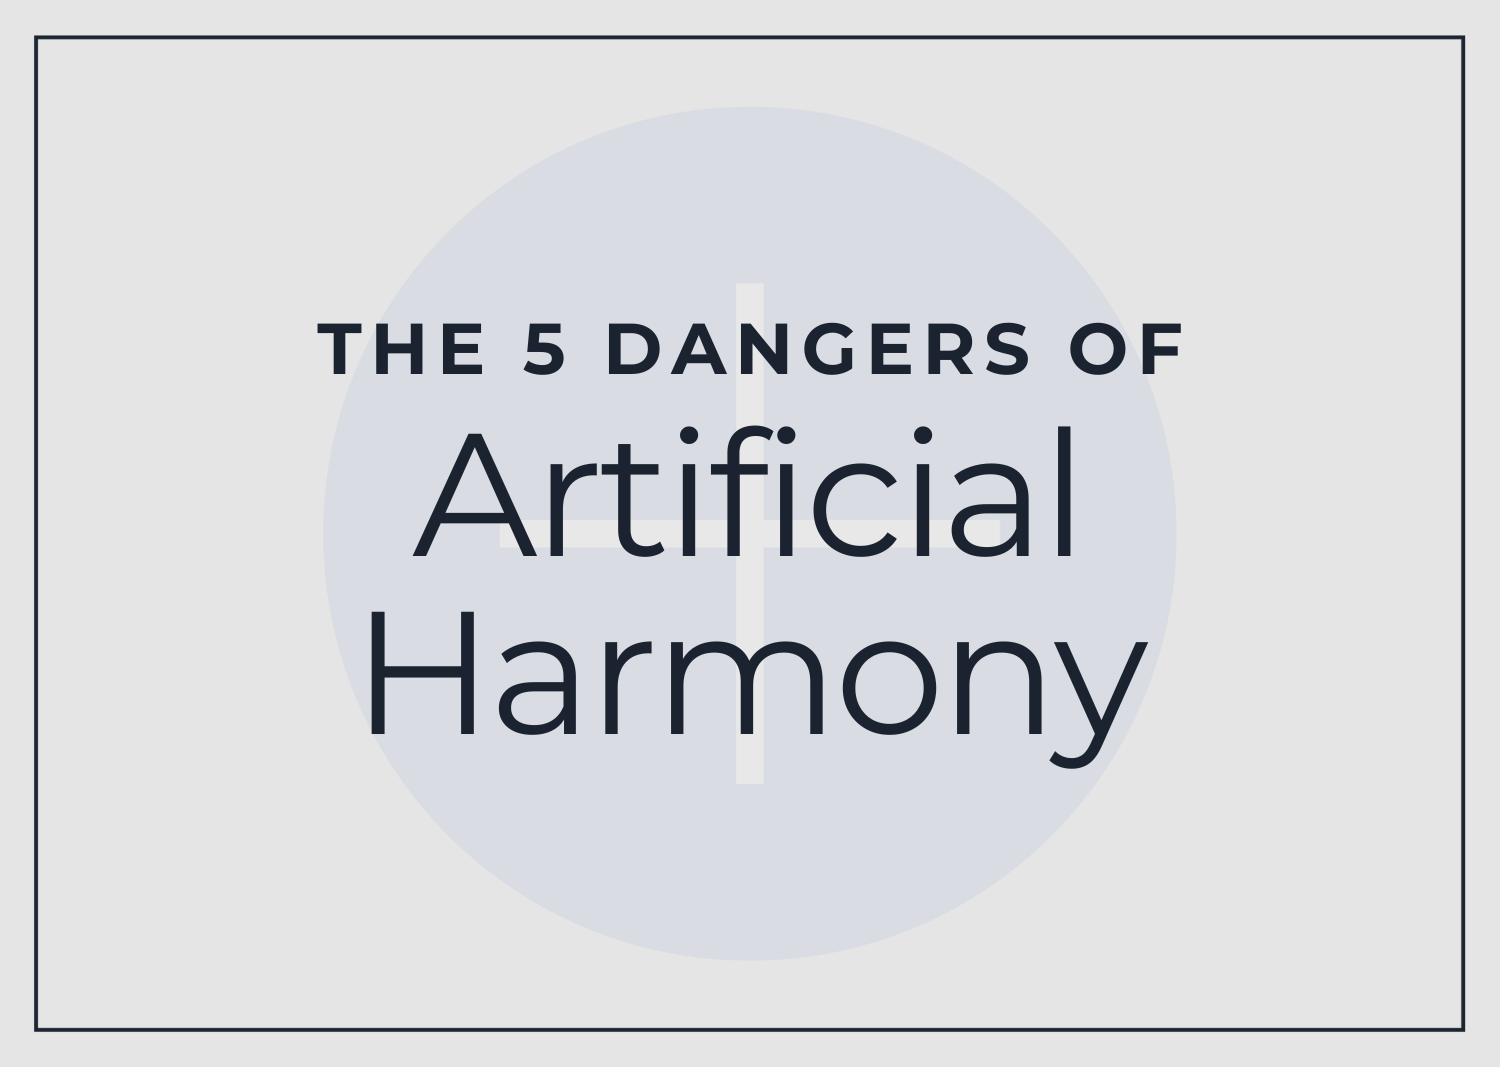 5 Dangers of Artificial Harmony